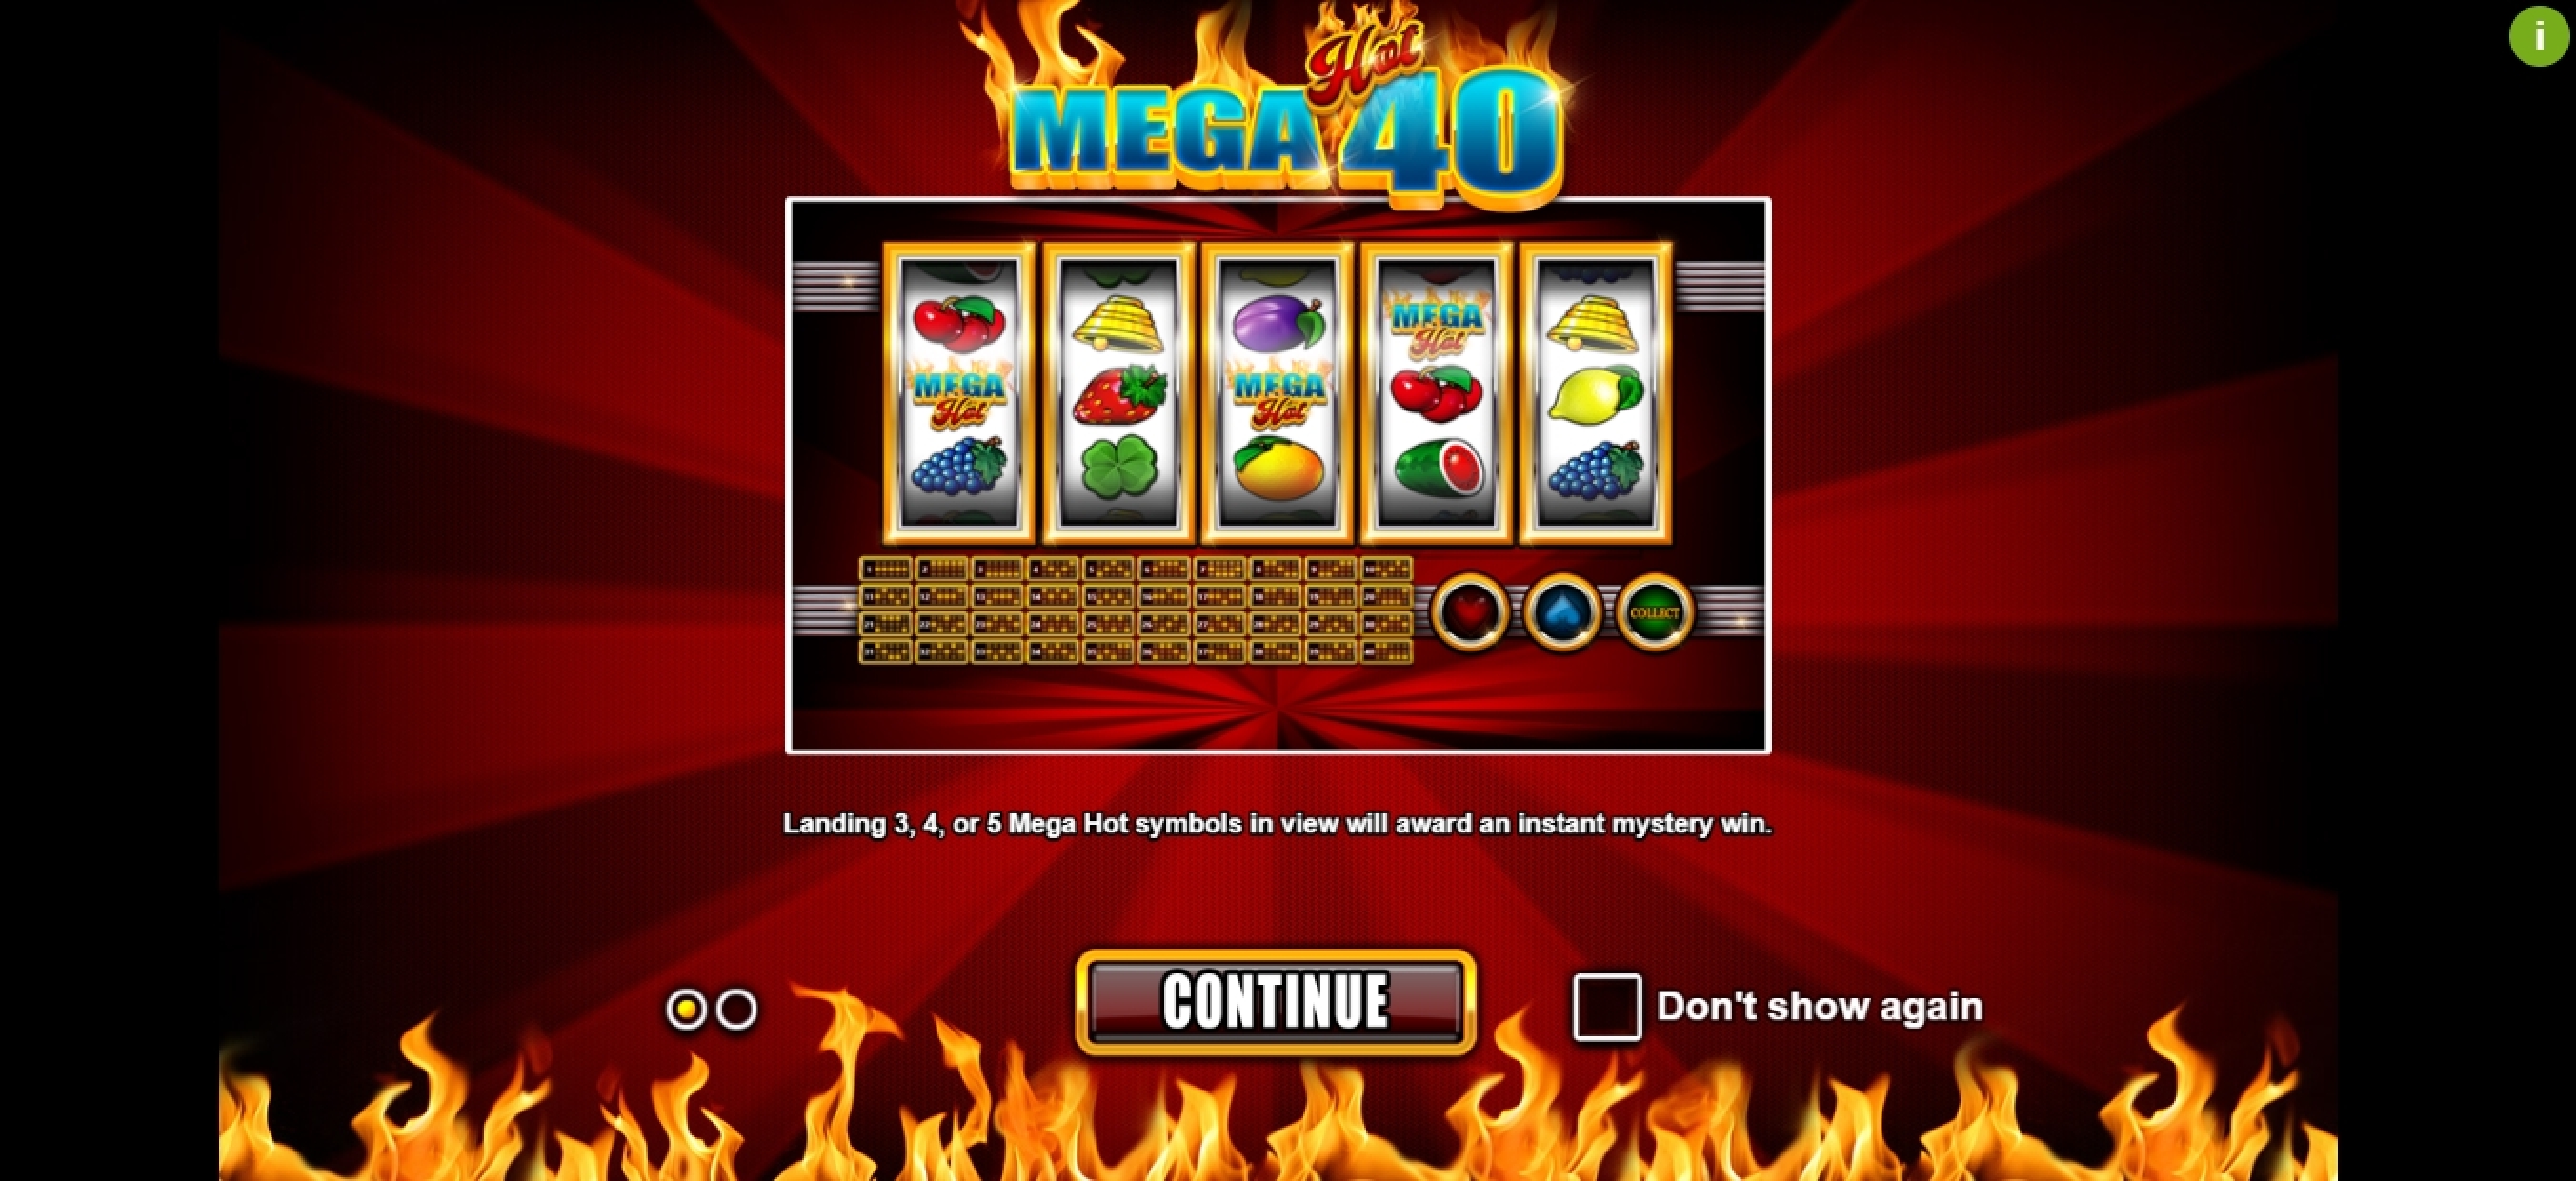 Play Mega Hot 40 Free Casino Slot Game by Betsson Group